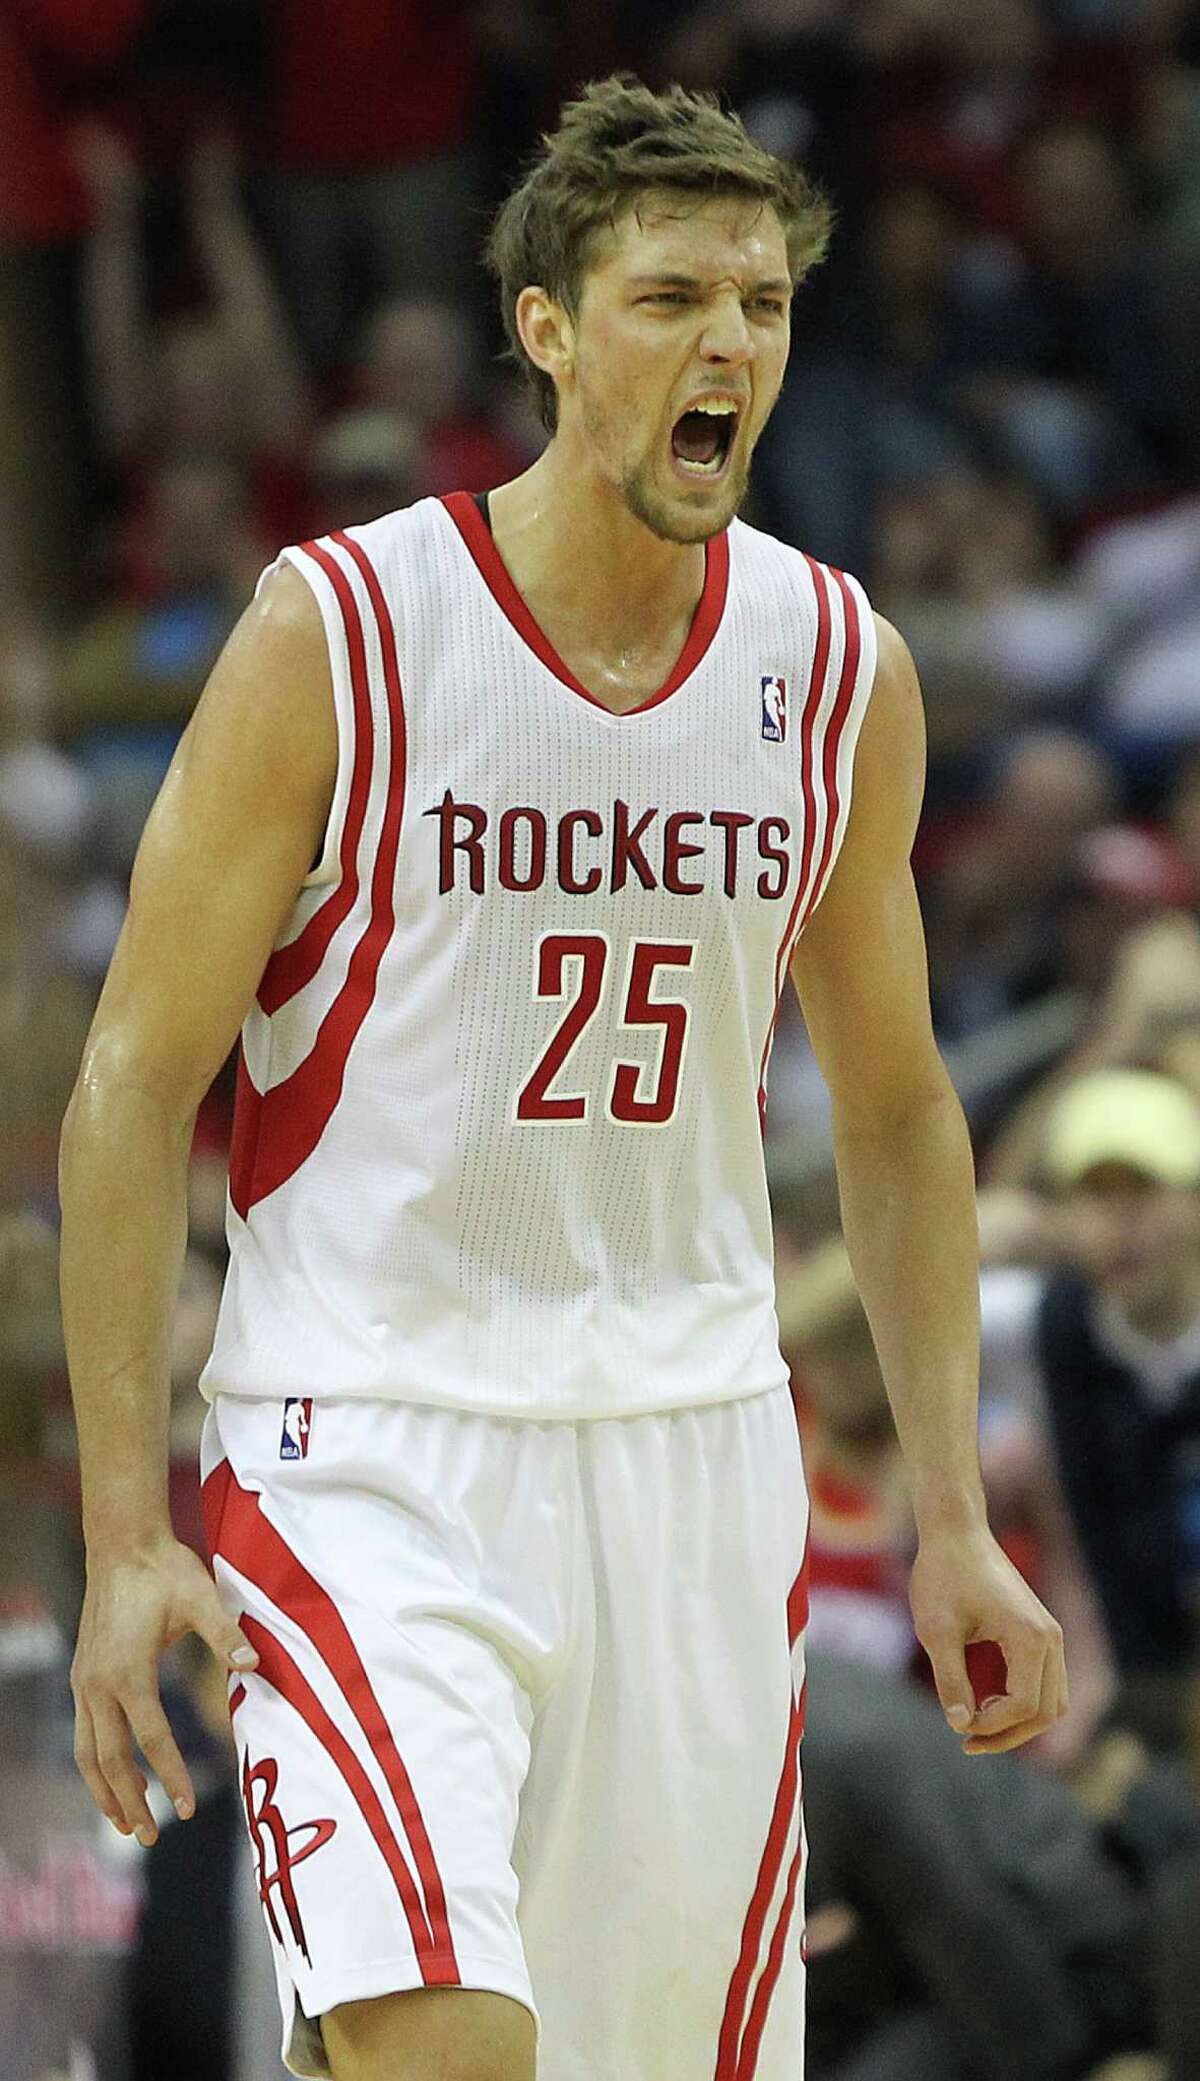 Chandler Parsons (25) screams after James Harden (13) scored a basket and was fouled during the fourth quarter of a NBA basketball game, Saturday, Feb. 2, 2013, in Toyota Center in Houston. ( Nick de la Torre / Chronicle )